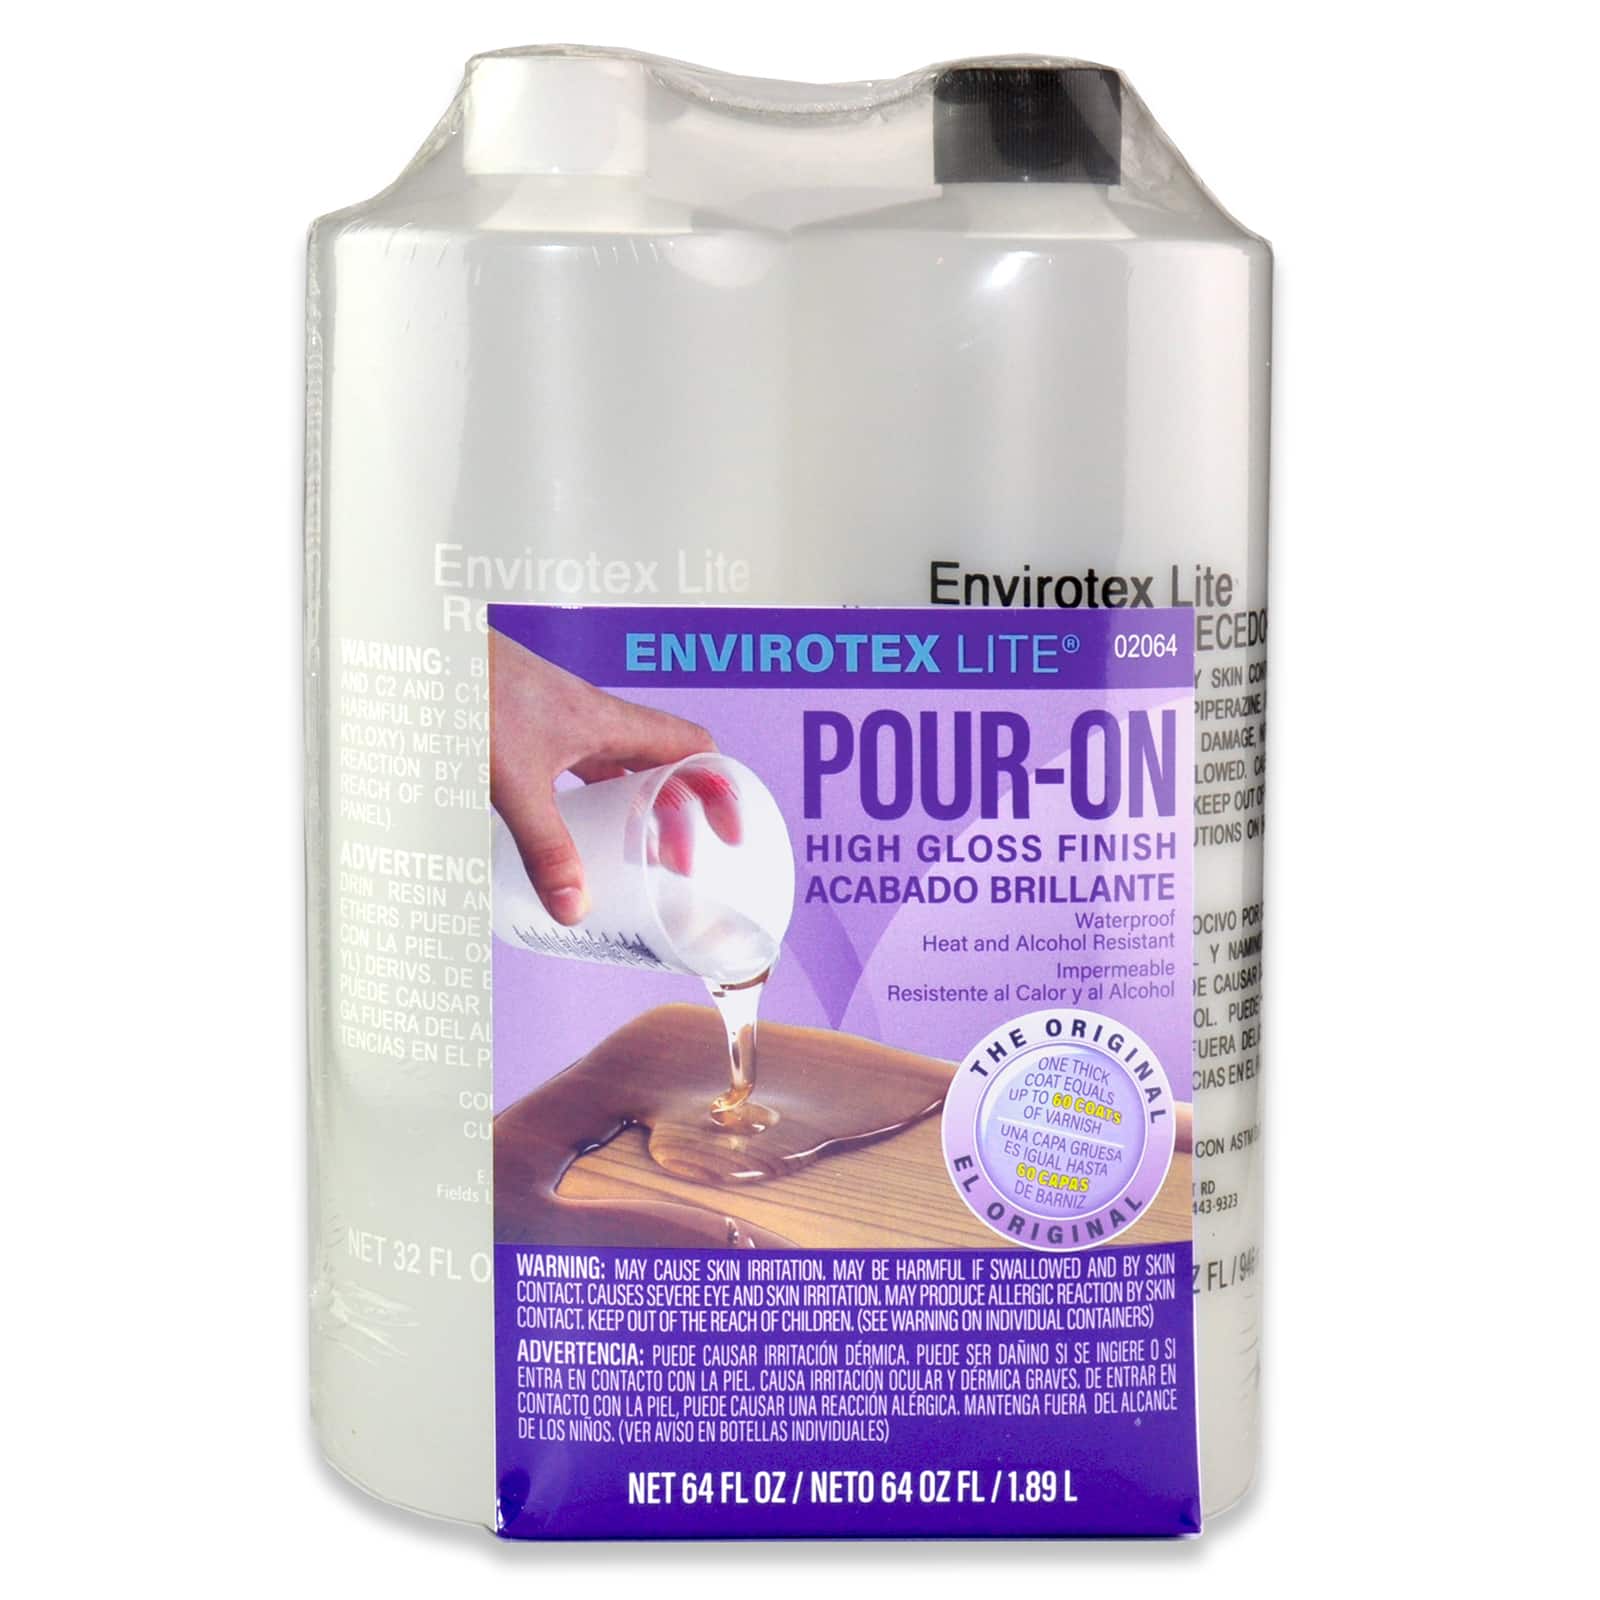 Envirotex Lite Pour-On High Gloss Finish 02064